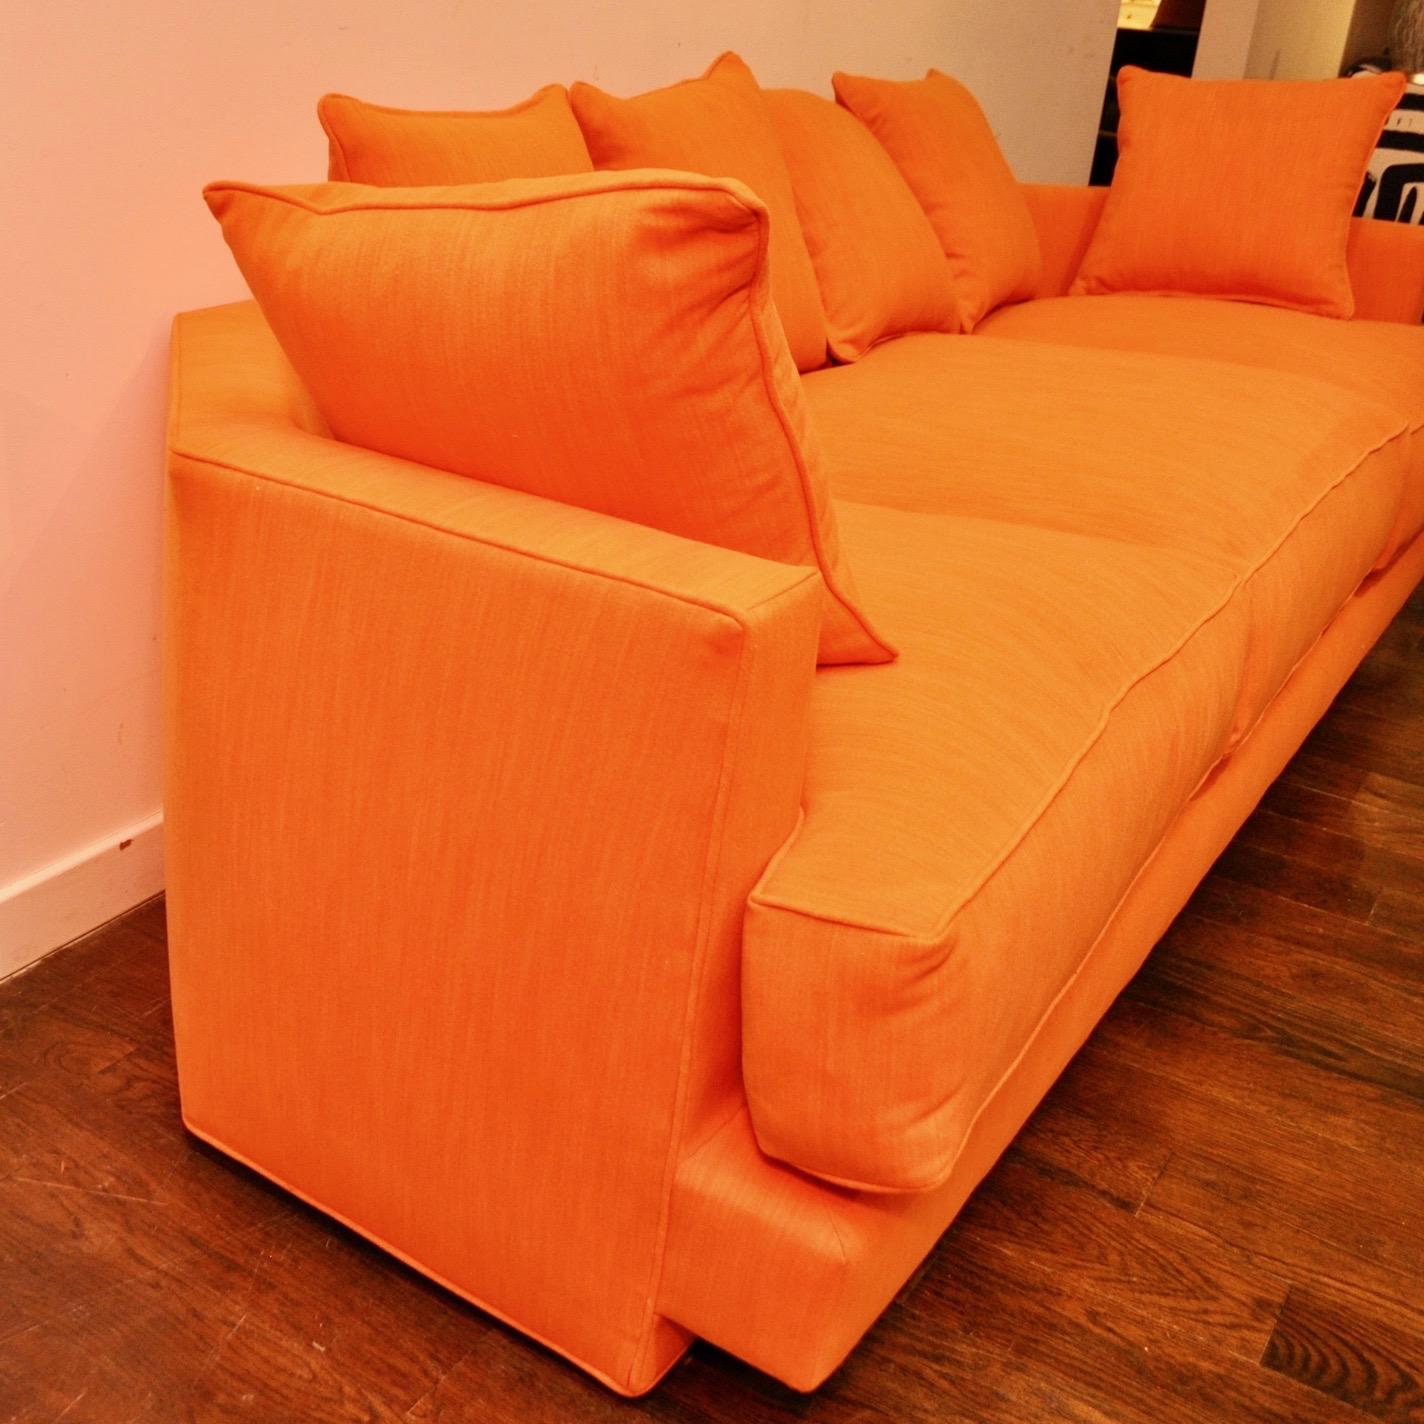 1970s era sofa, possibly custom made, with a unique angled back. Newly reupholstered in an orange cotton velvet with thick down-filled cushions. Thanks to its interesting shape, this piece can easily float out from the wall.